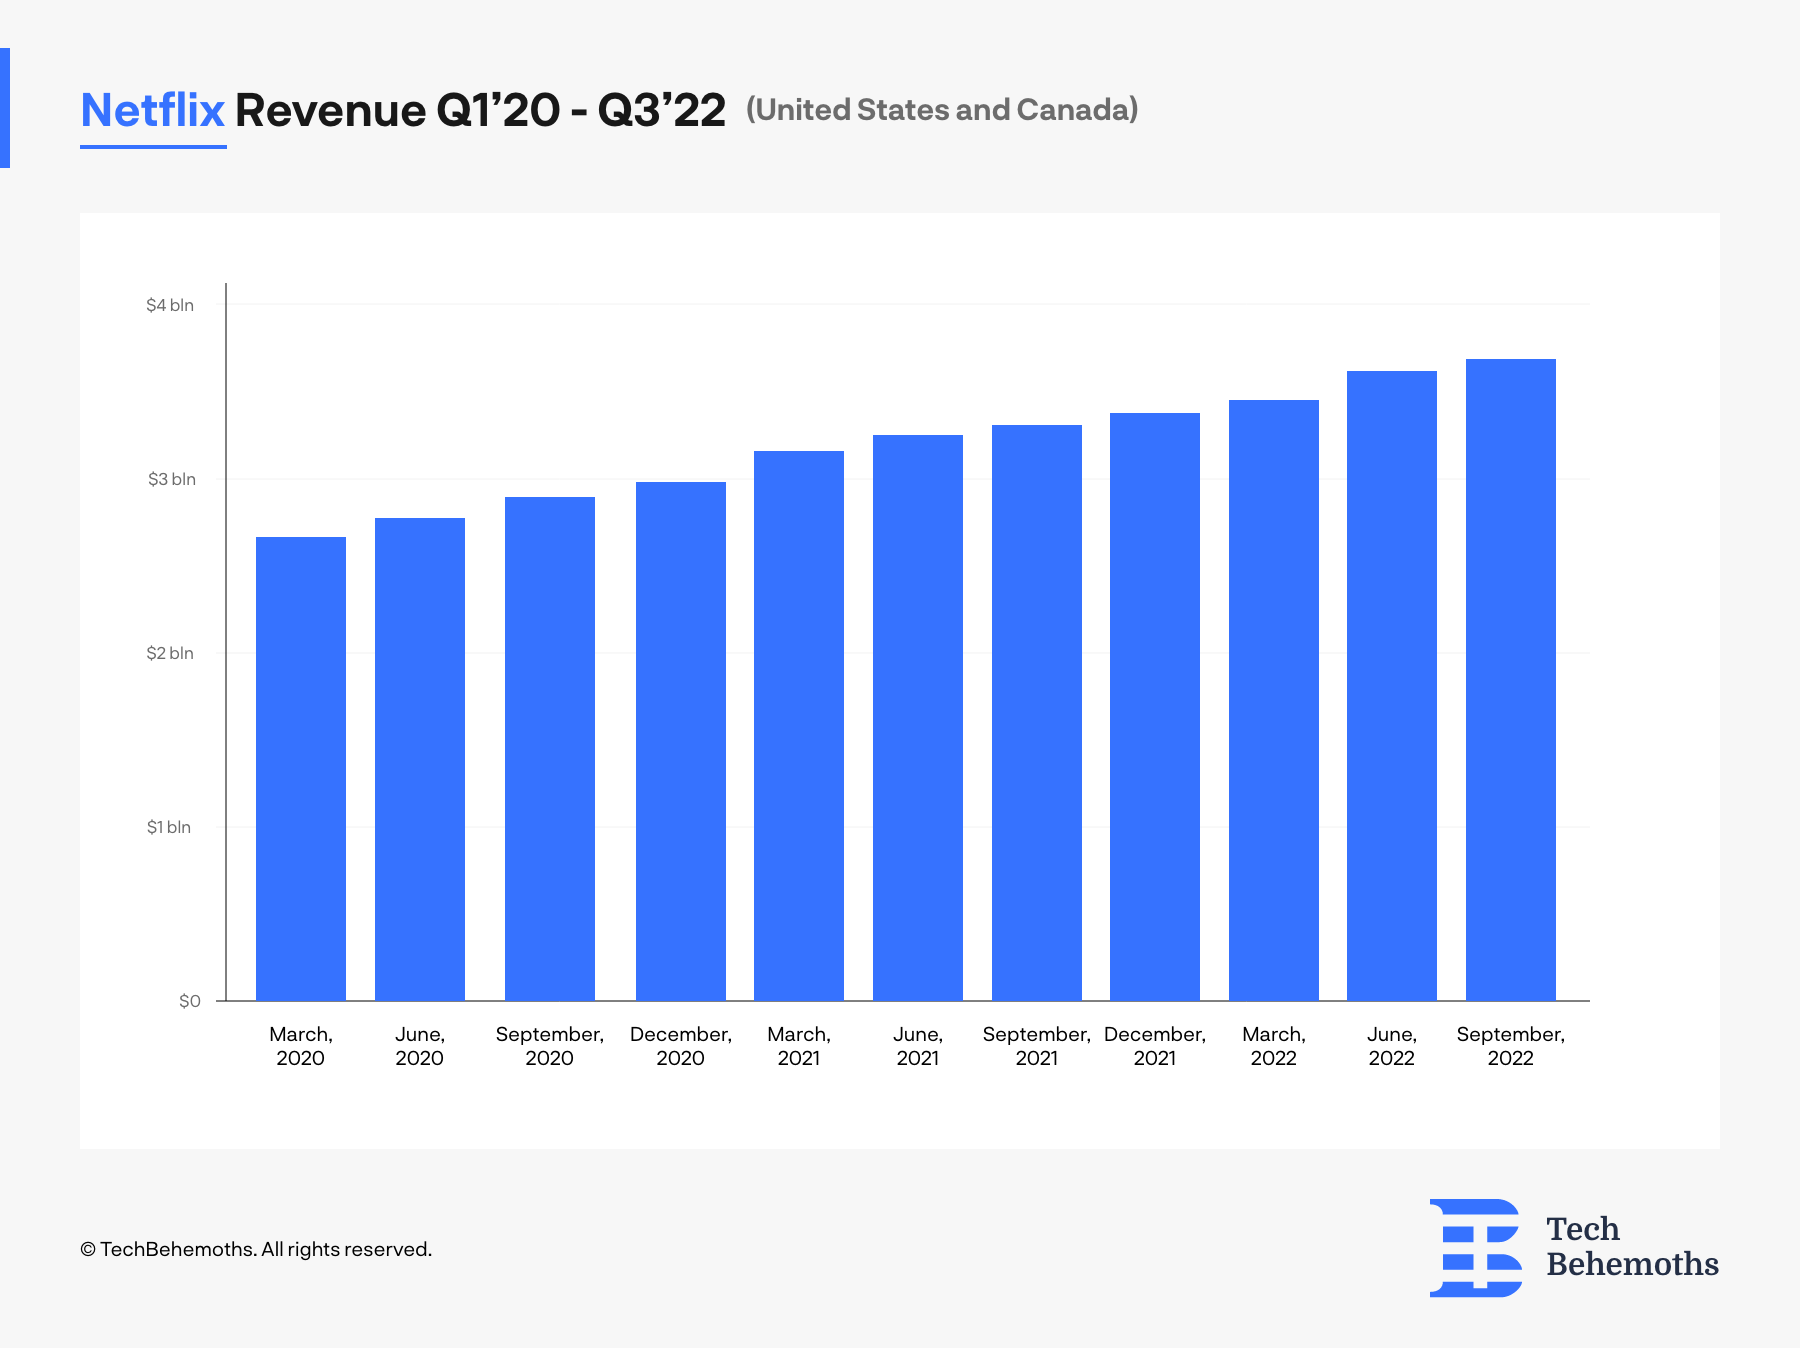 Netflix revenue from streaming services in the United States and Canada between 2020 - 2022